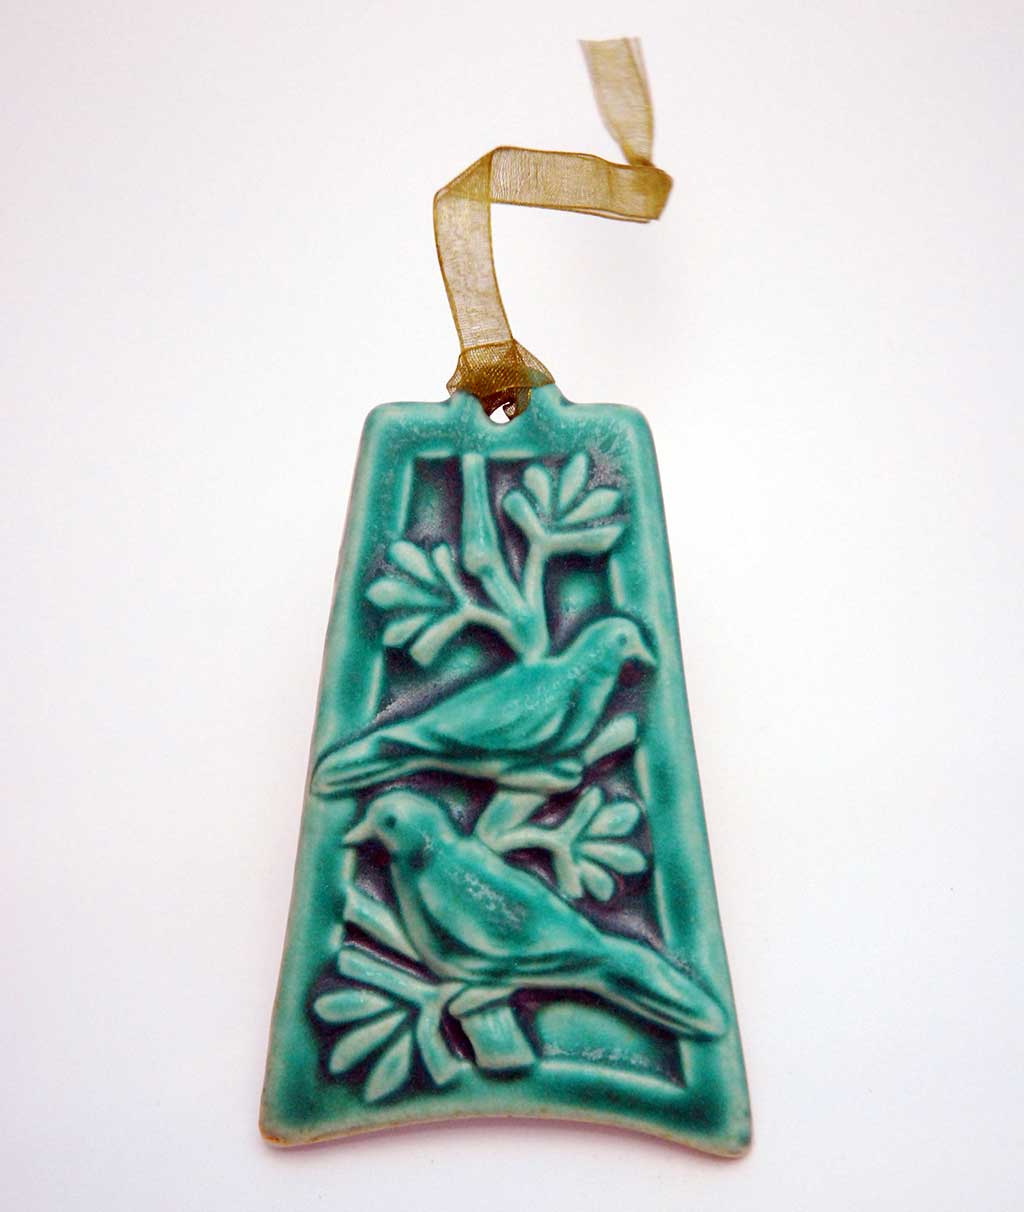 Pewabic, 12 Days of Christmas ornament (2 Turtle Doves)